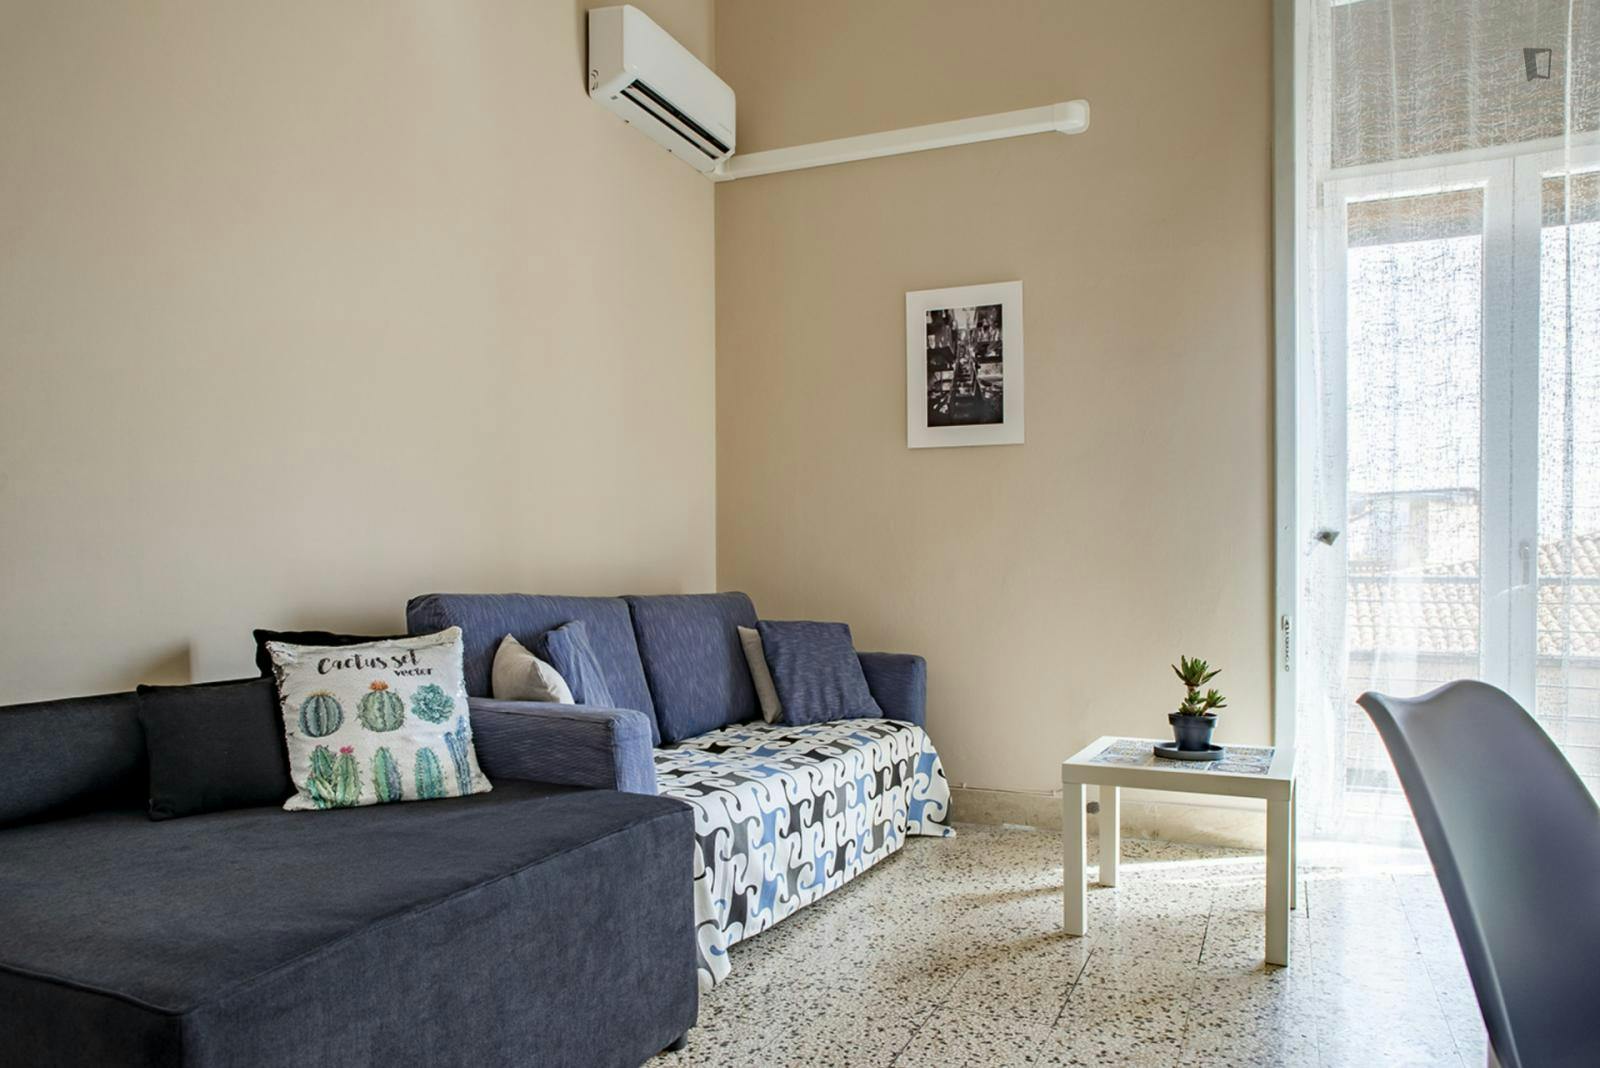 Homely 2-bedroom apartment with balcony at the gates of the island of Ortigia